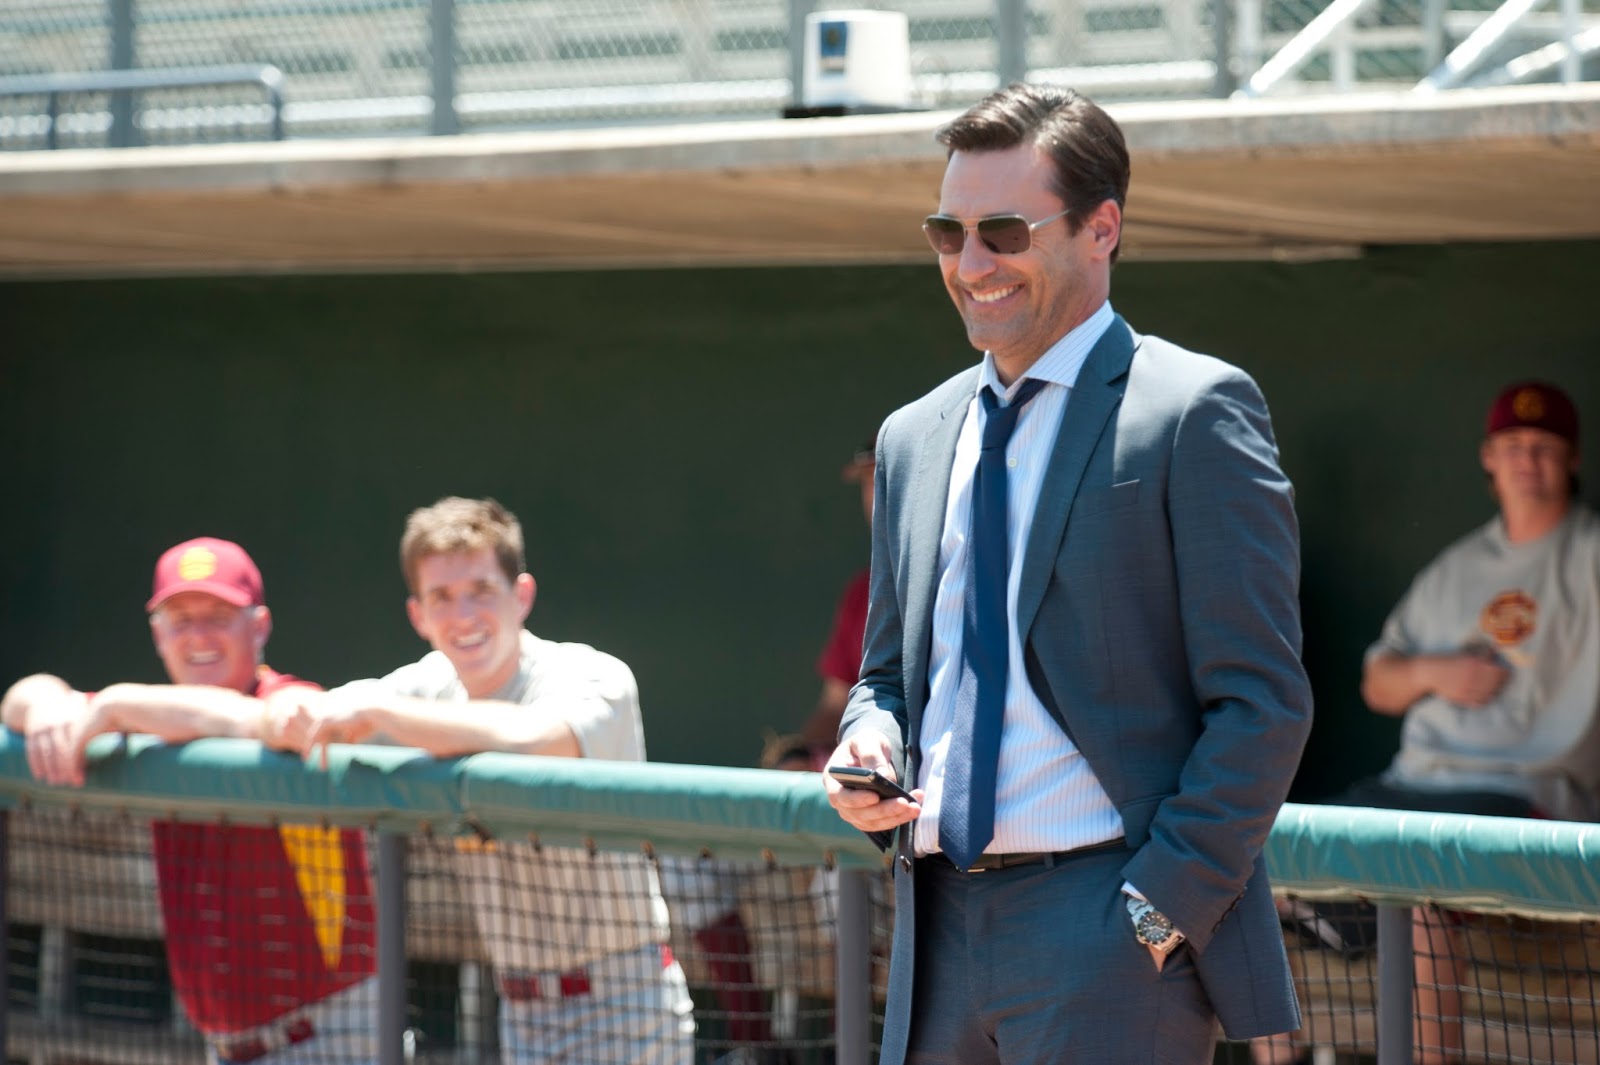 Disney's Million Dollar Arm Pitching Contest Offers a Chance to Win $1 Million Dollars!!